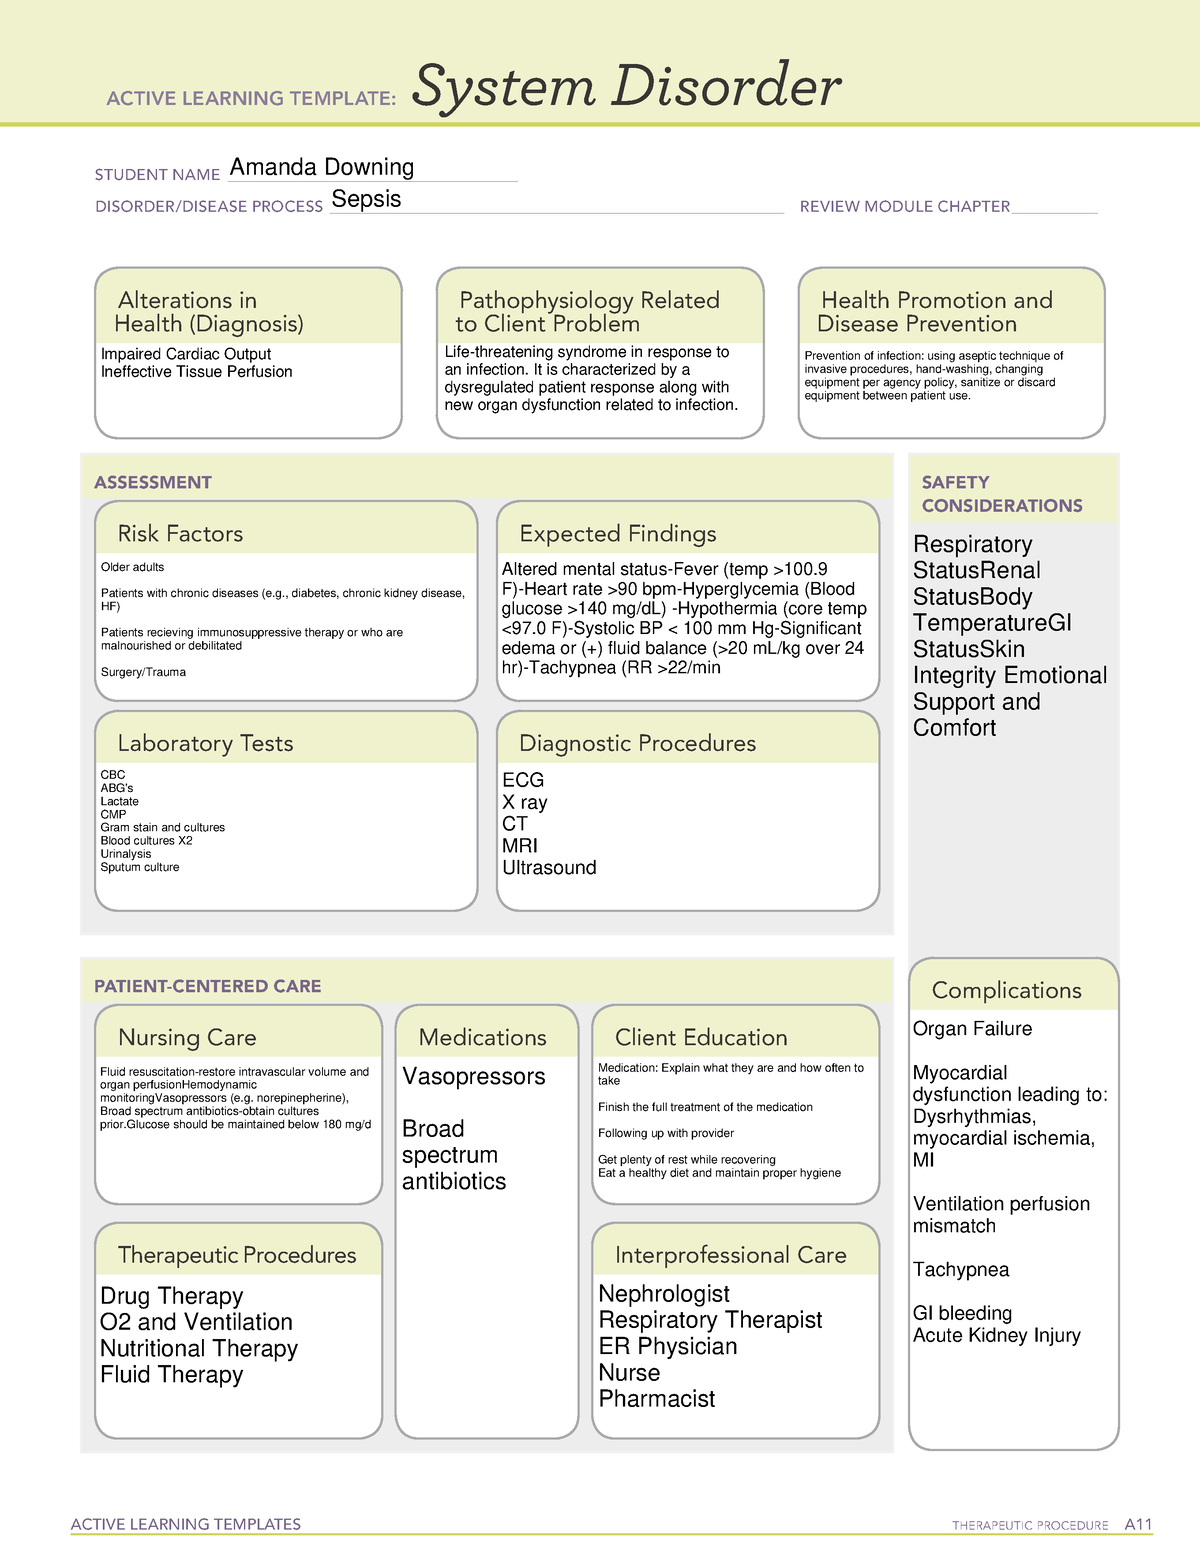 ATI System Disorder Template: Sepsis ACTIVE LEARNING TEMPLATES